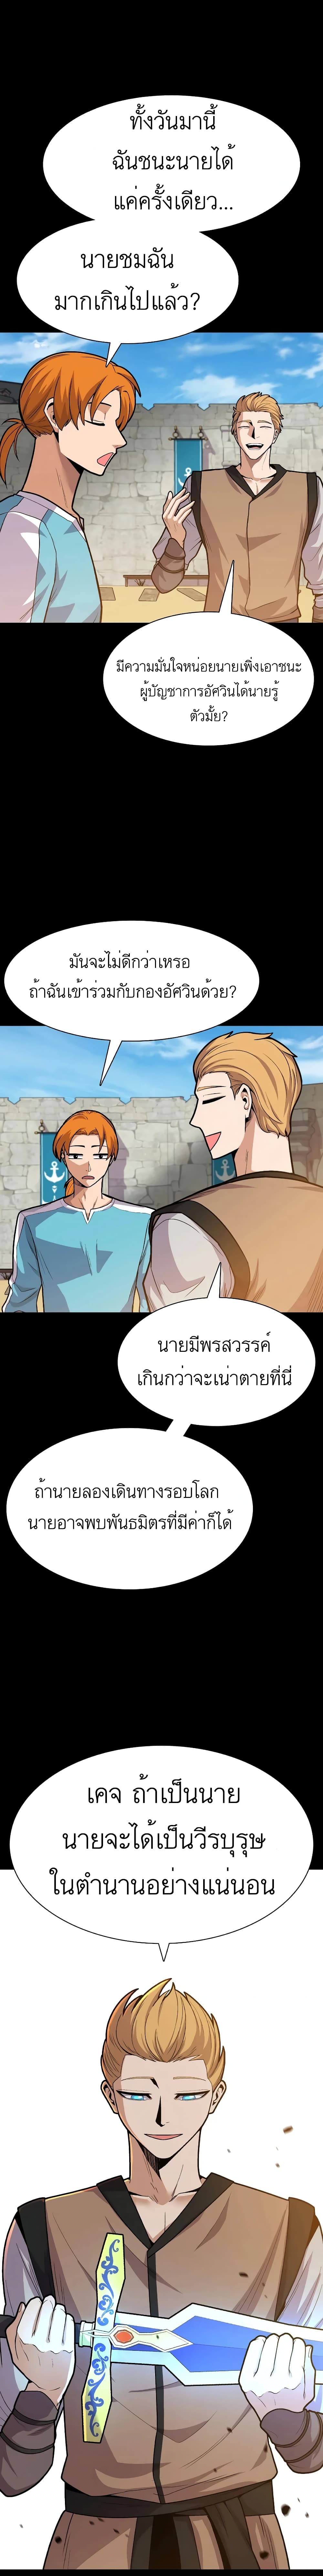 Raising Newbie Heroes In Another World ตอนที่ 8 (3)